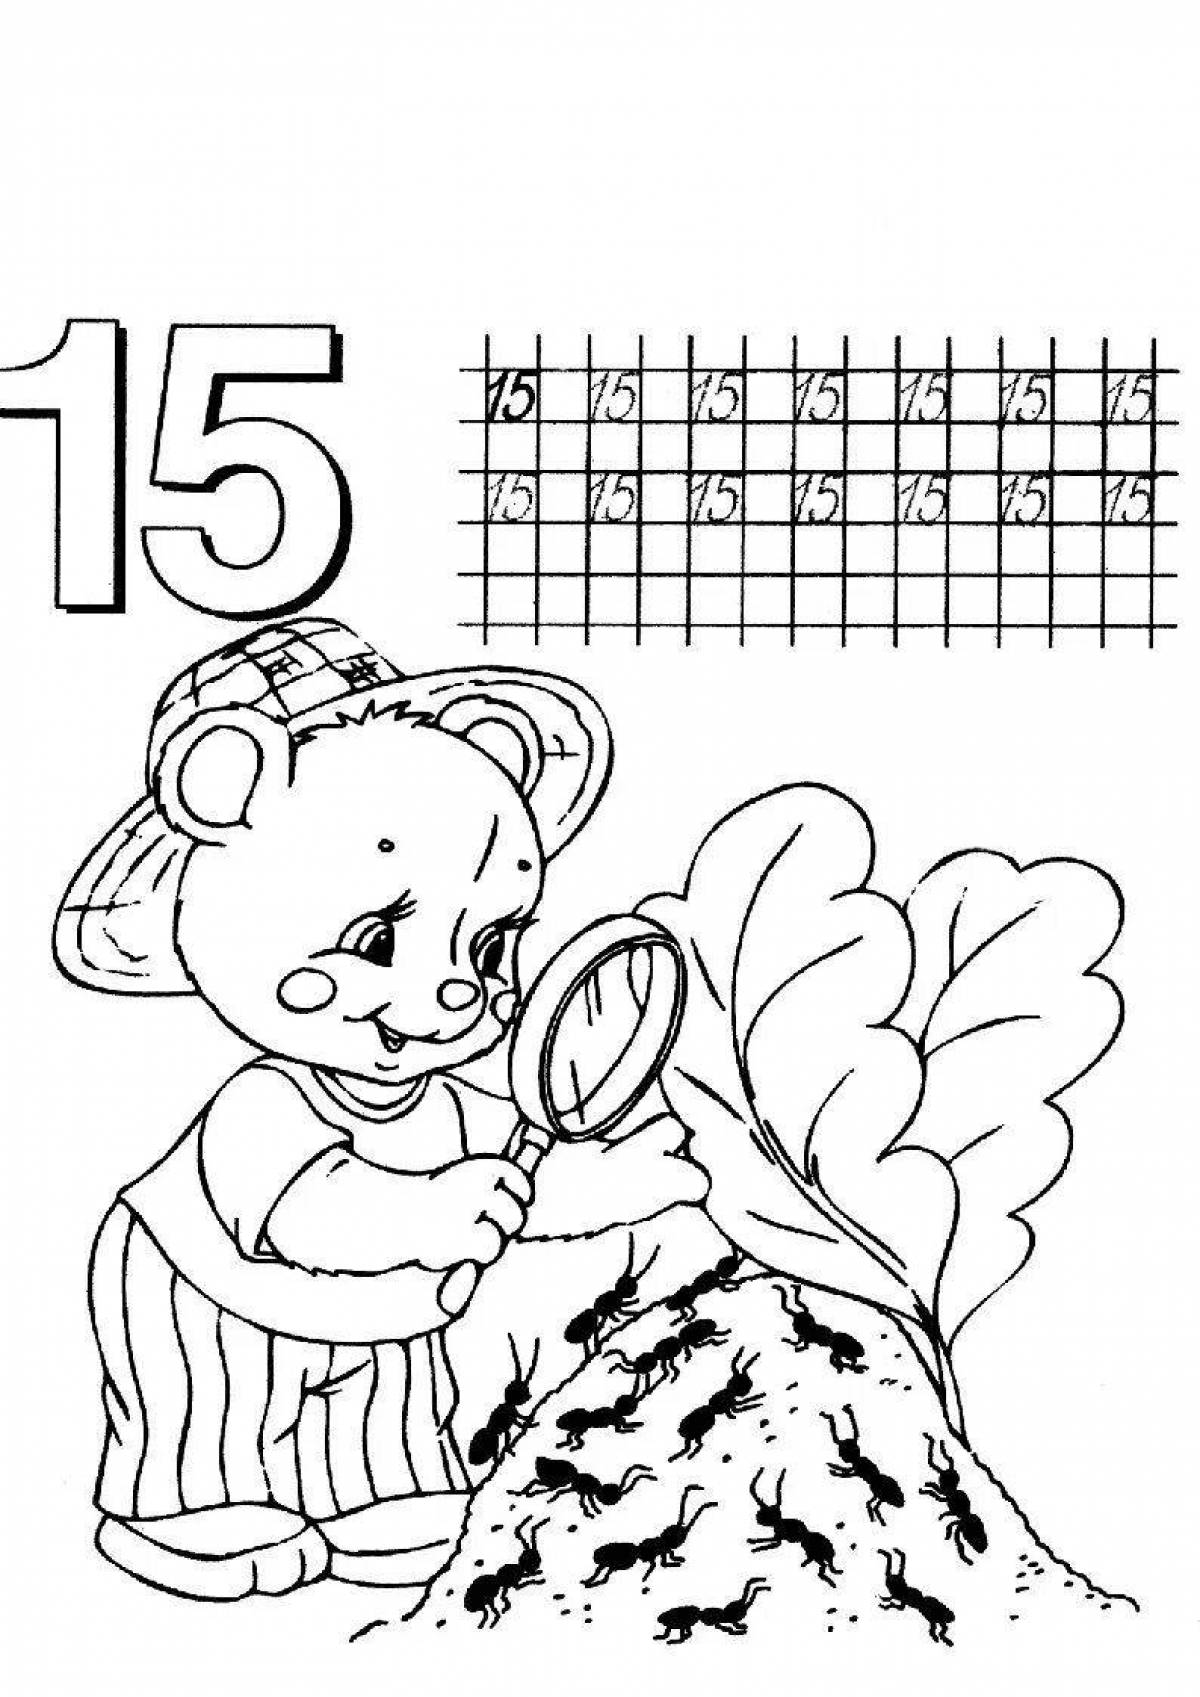 Color adventure coloring book learning numbers